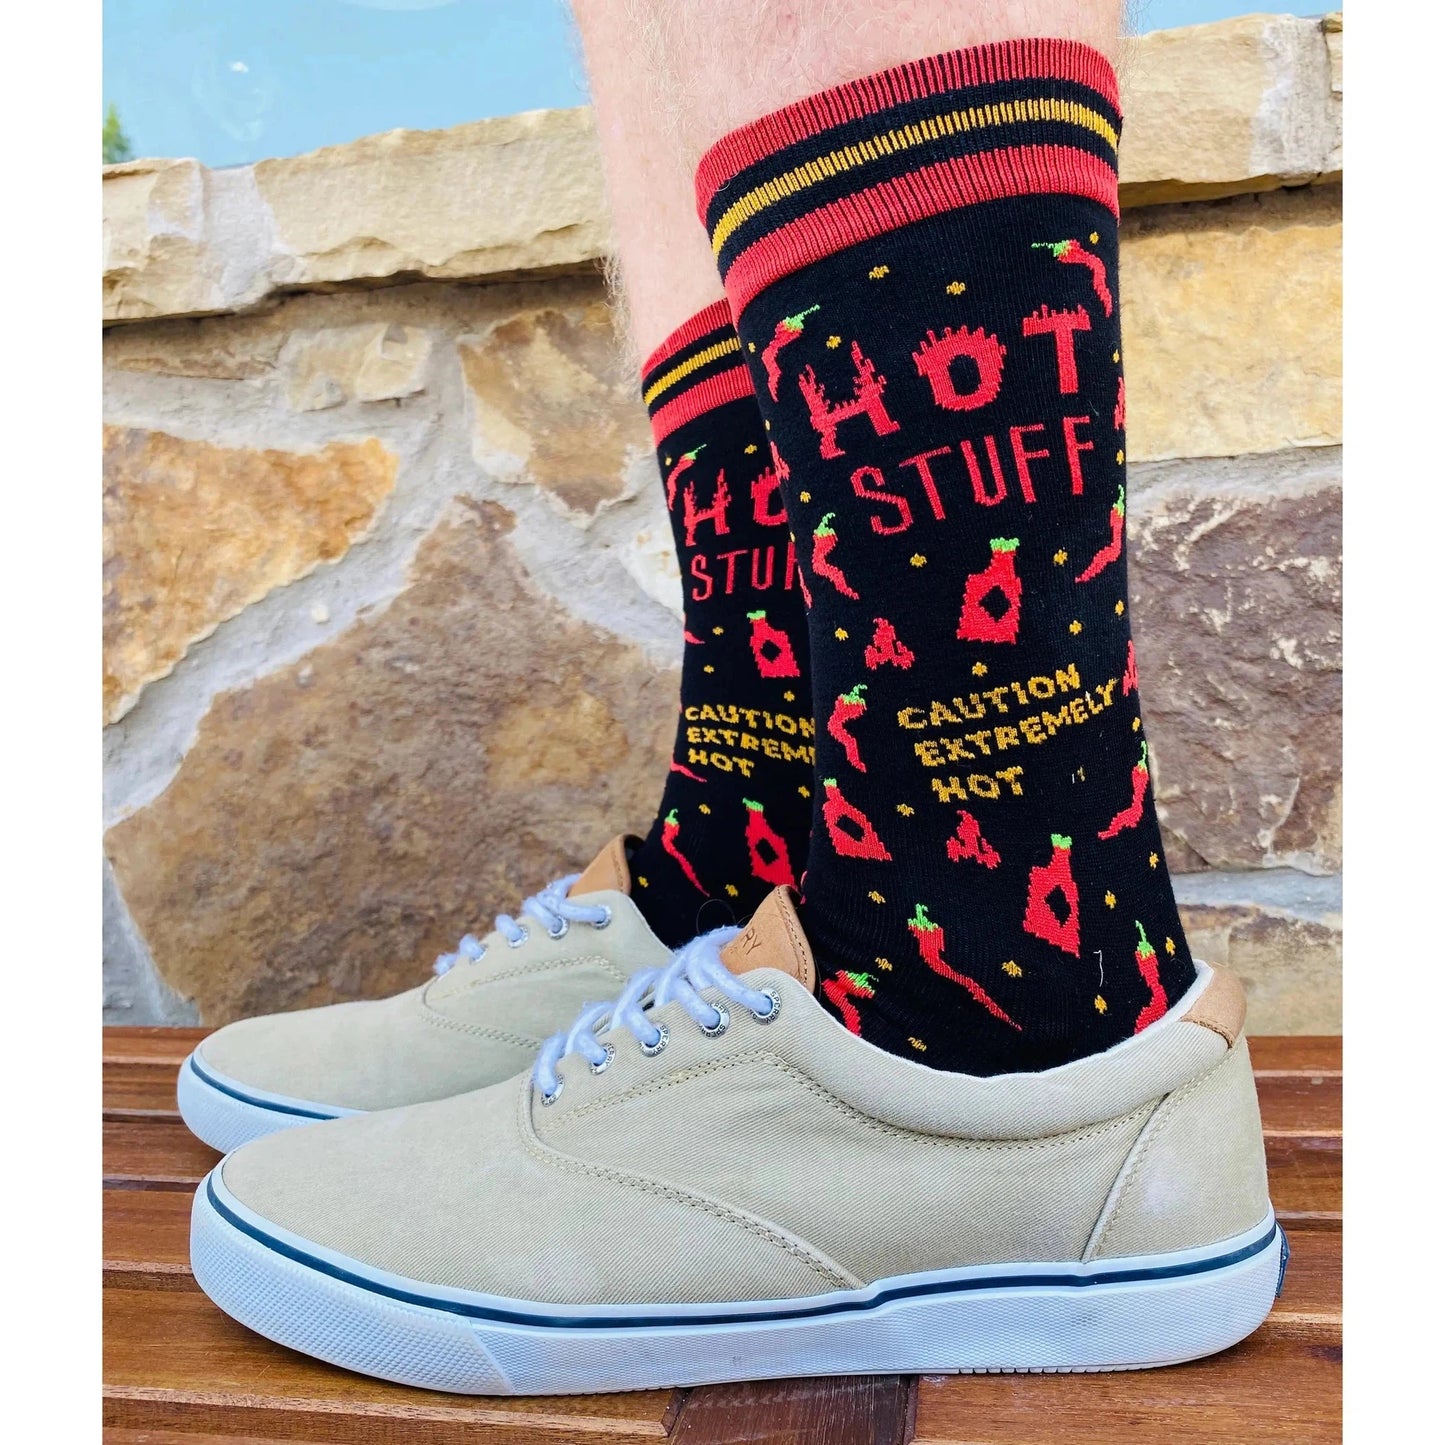 Hot Stuff! Caution Extremely Hot Men's Socks